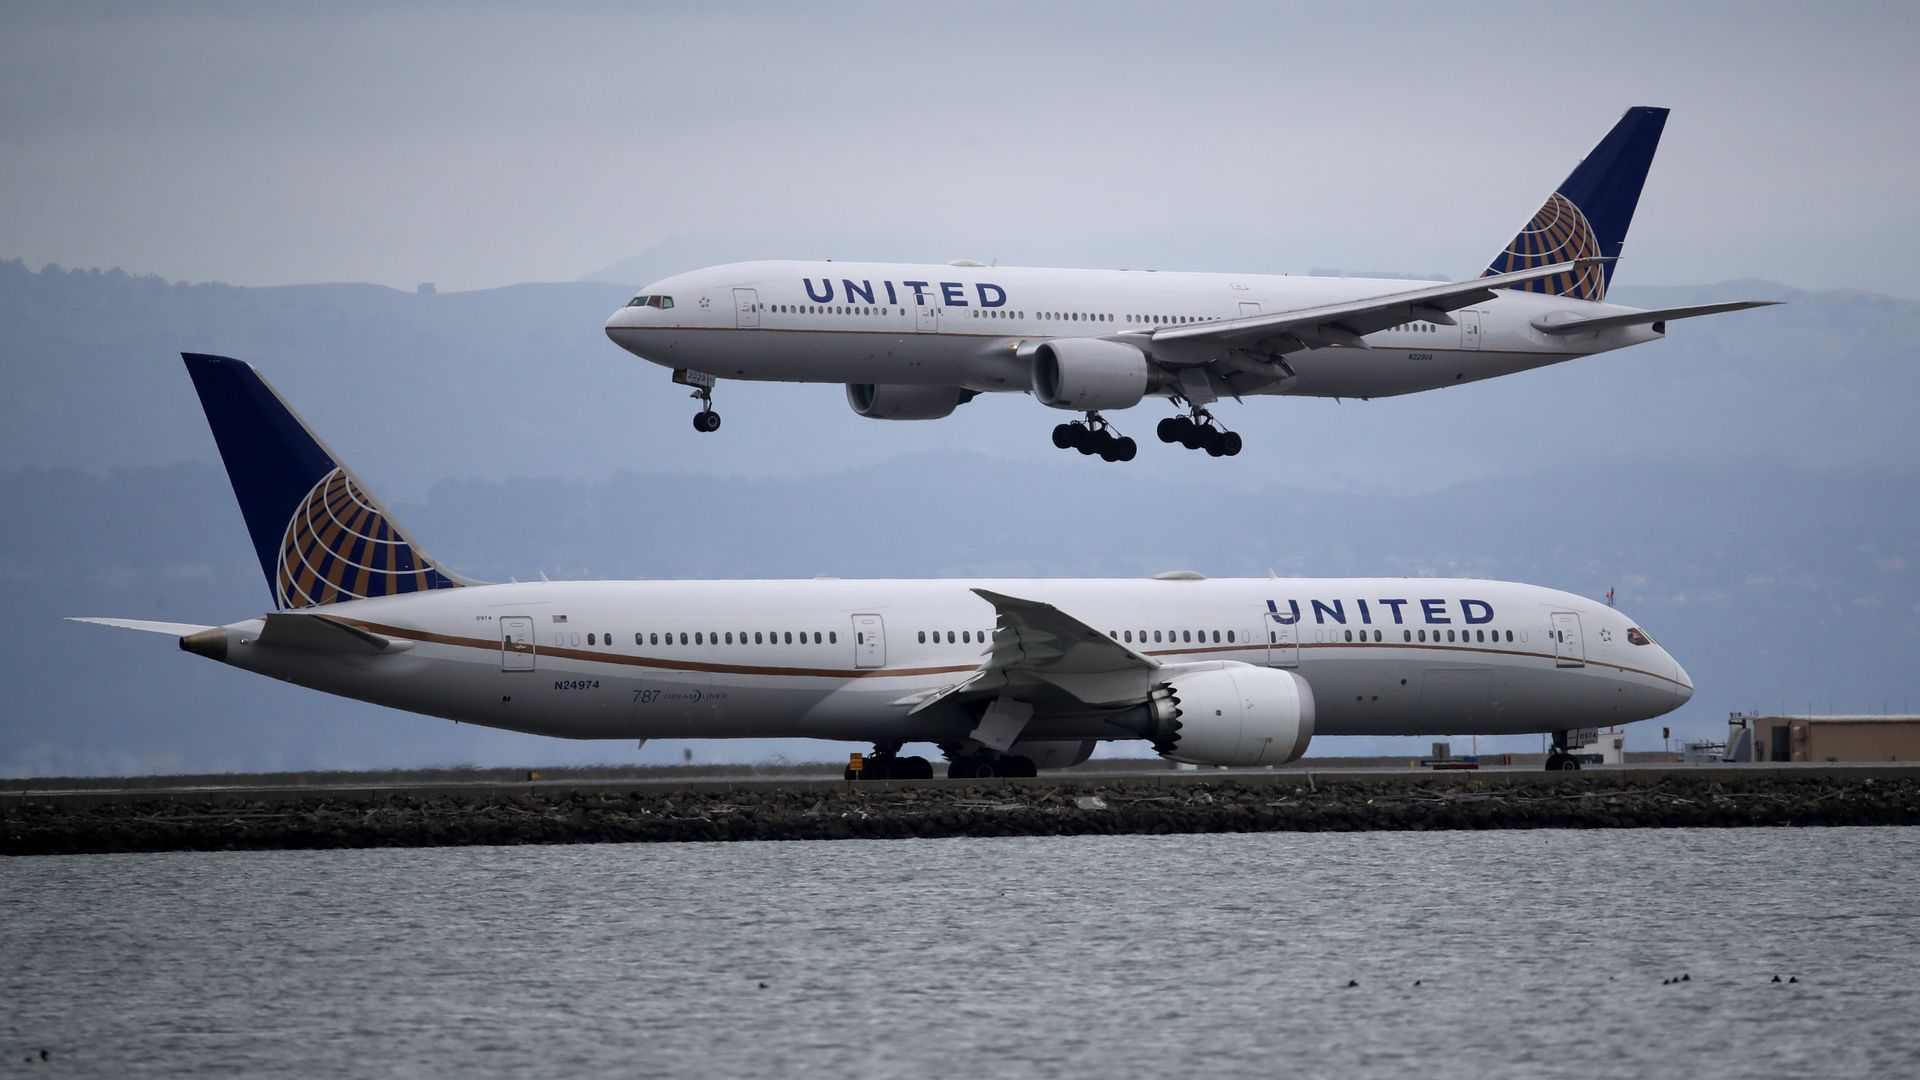 A United Airlines plane lands at San Francisco International Airport on March 06, 2020 in Burlingame, California. 